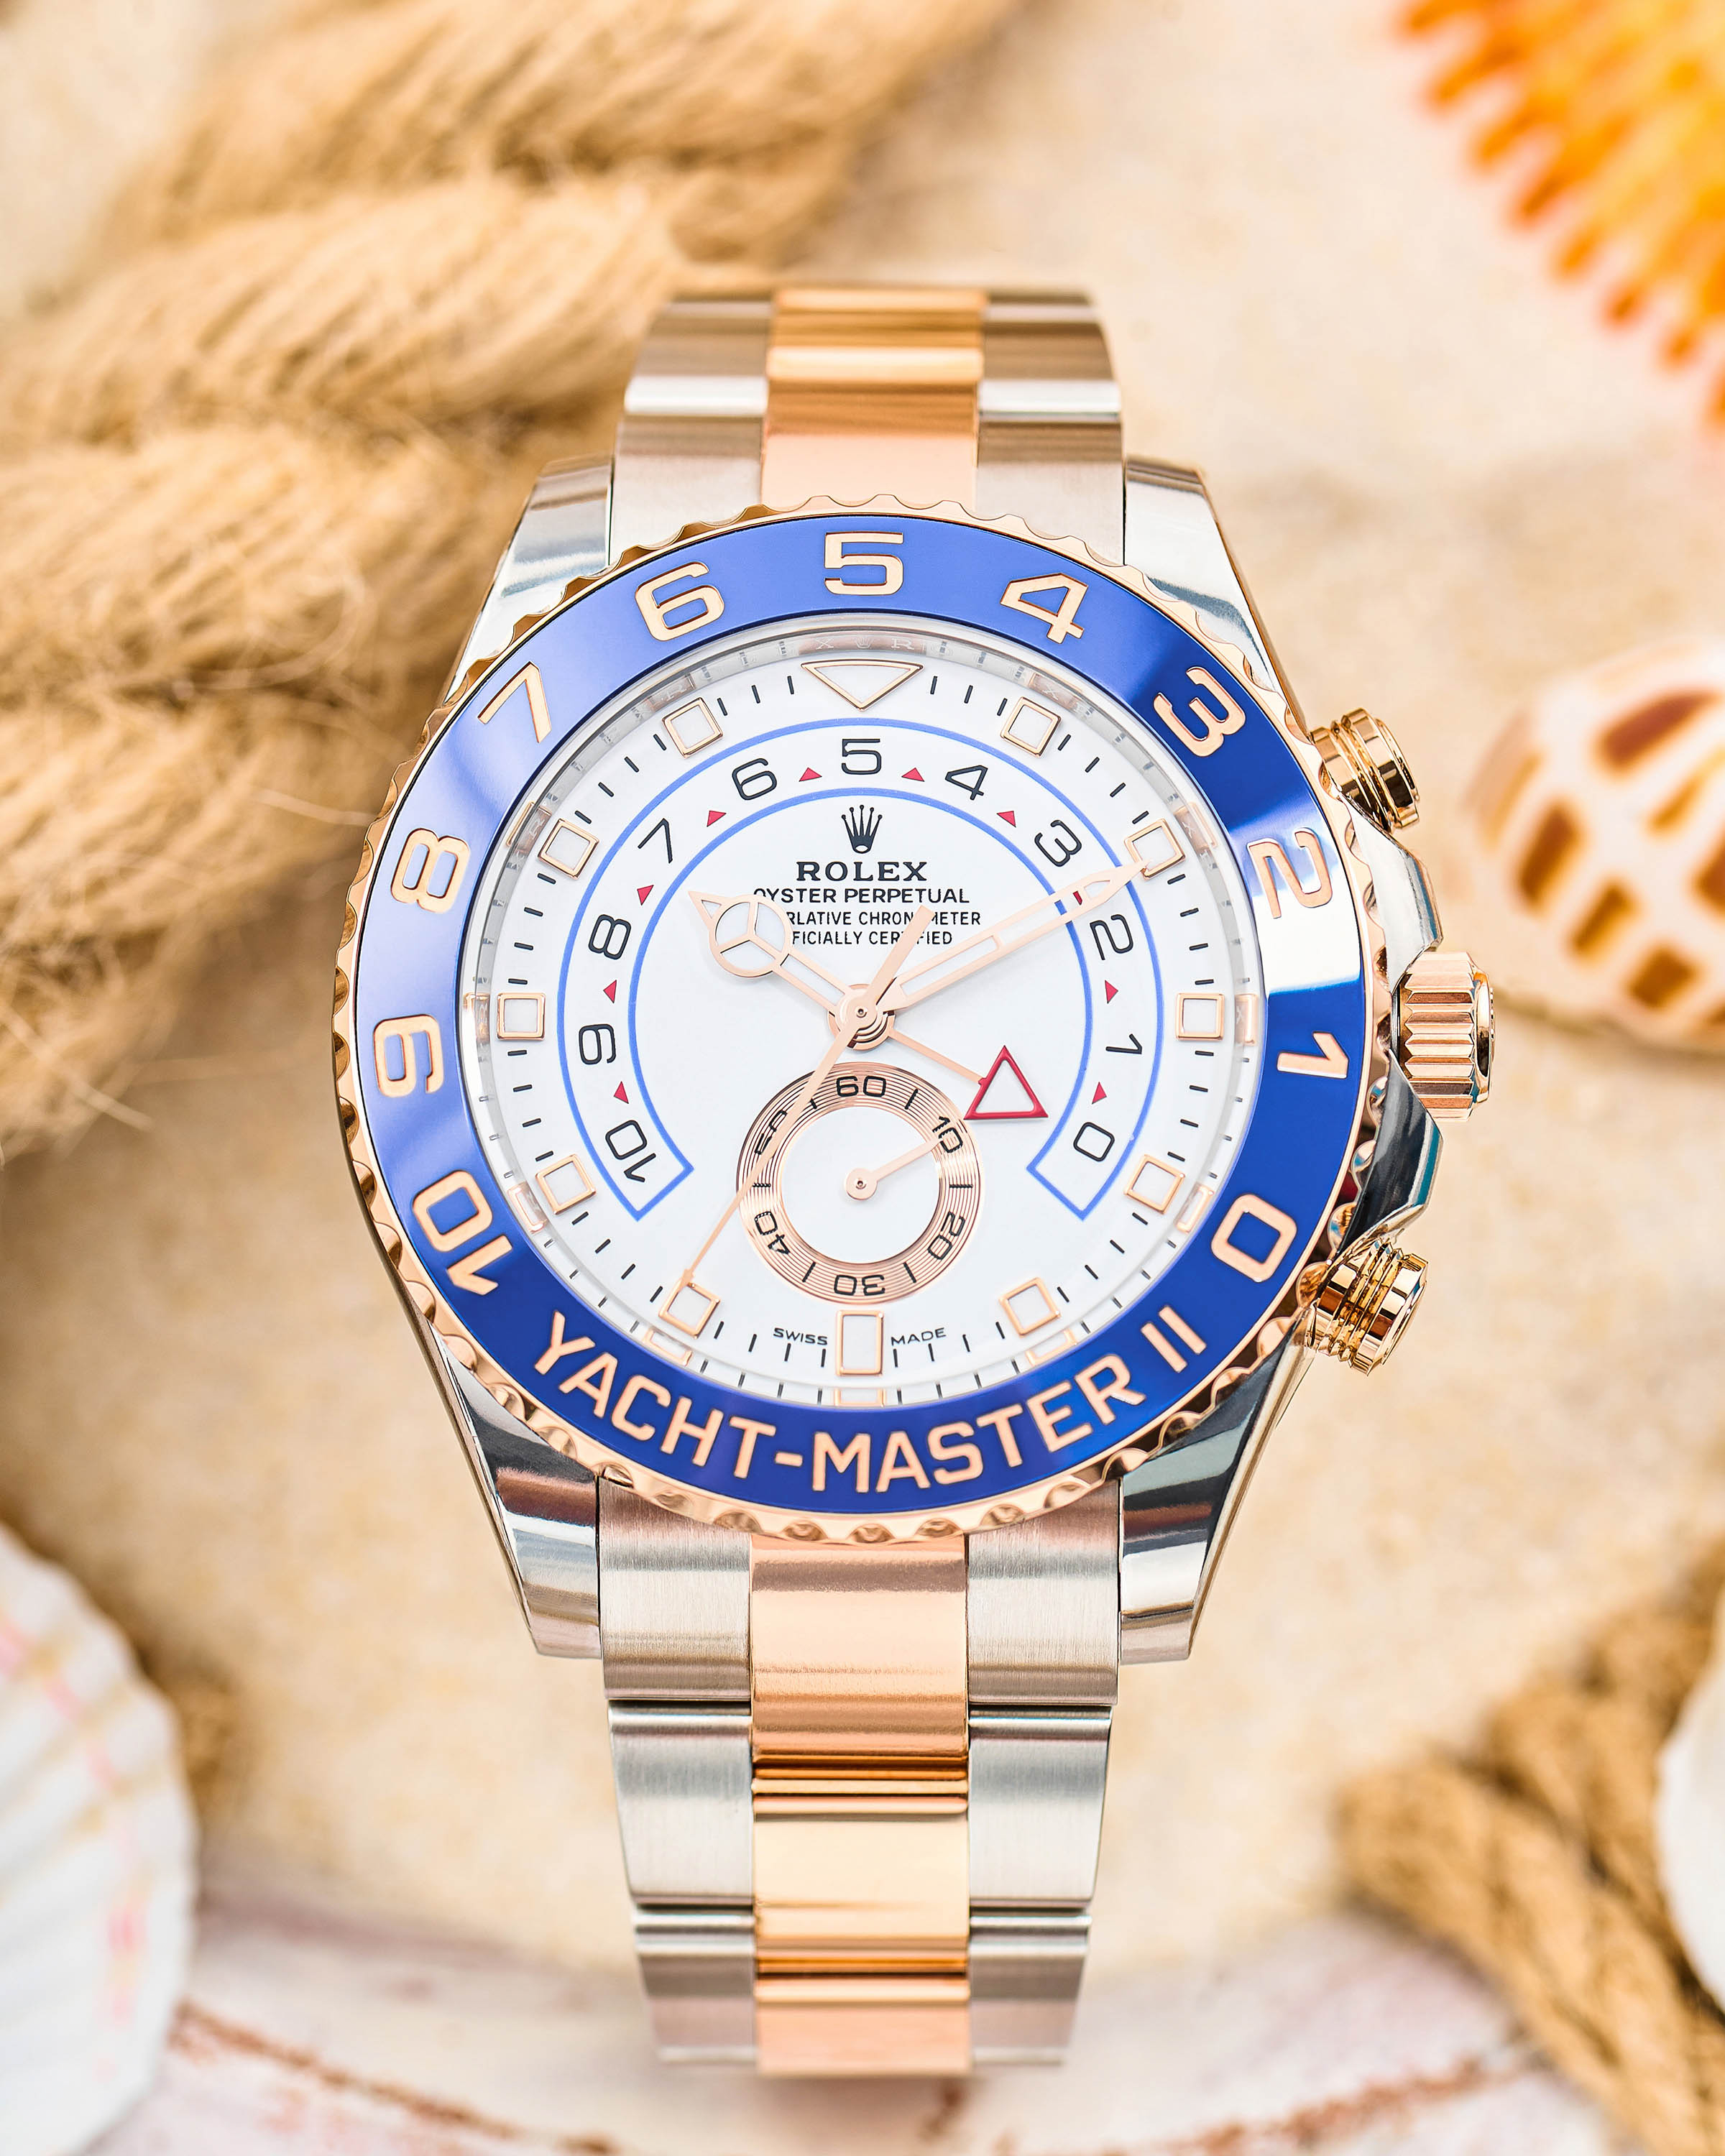 18K Yellow Gold Rolex Yacht-Master II Timepiece with White Dial on a Nautical Background with Ropes and Seashells.